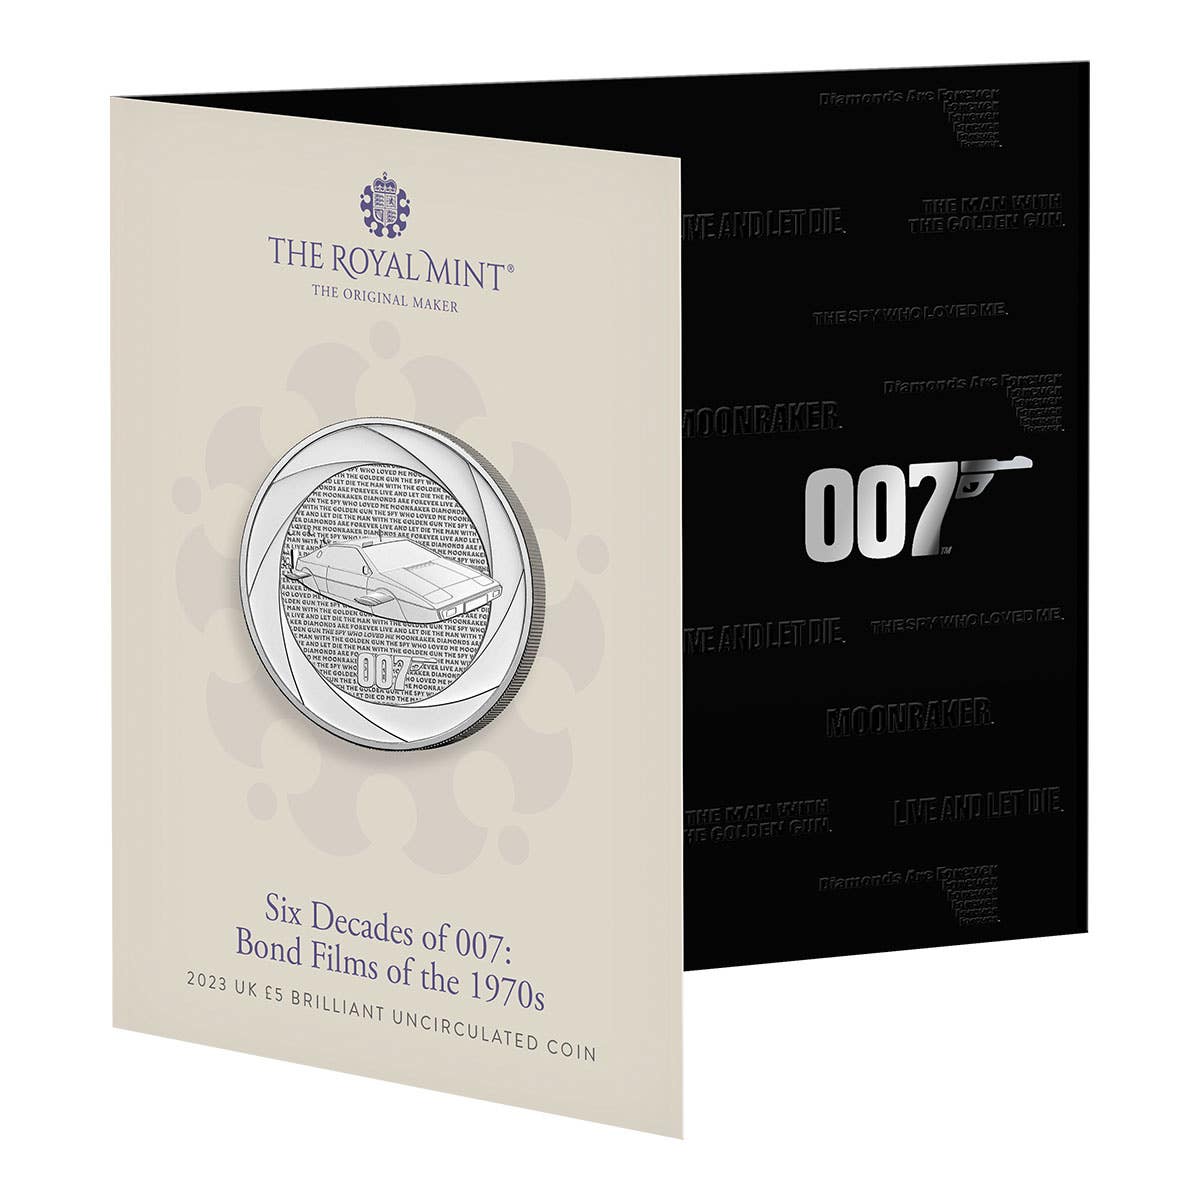 Bond Films of the 70s 2023 £5 Brilliant Uncirculated Coin